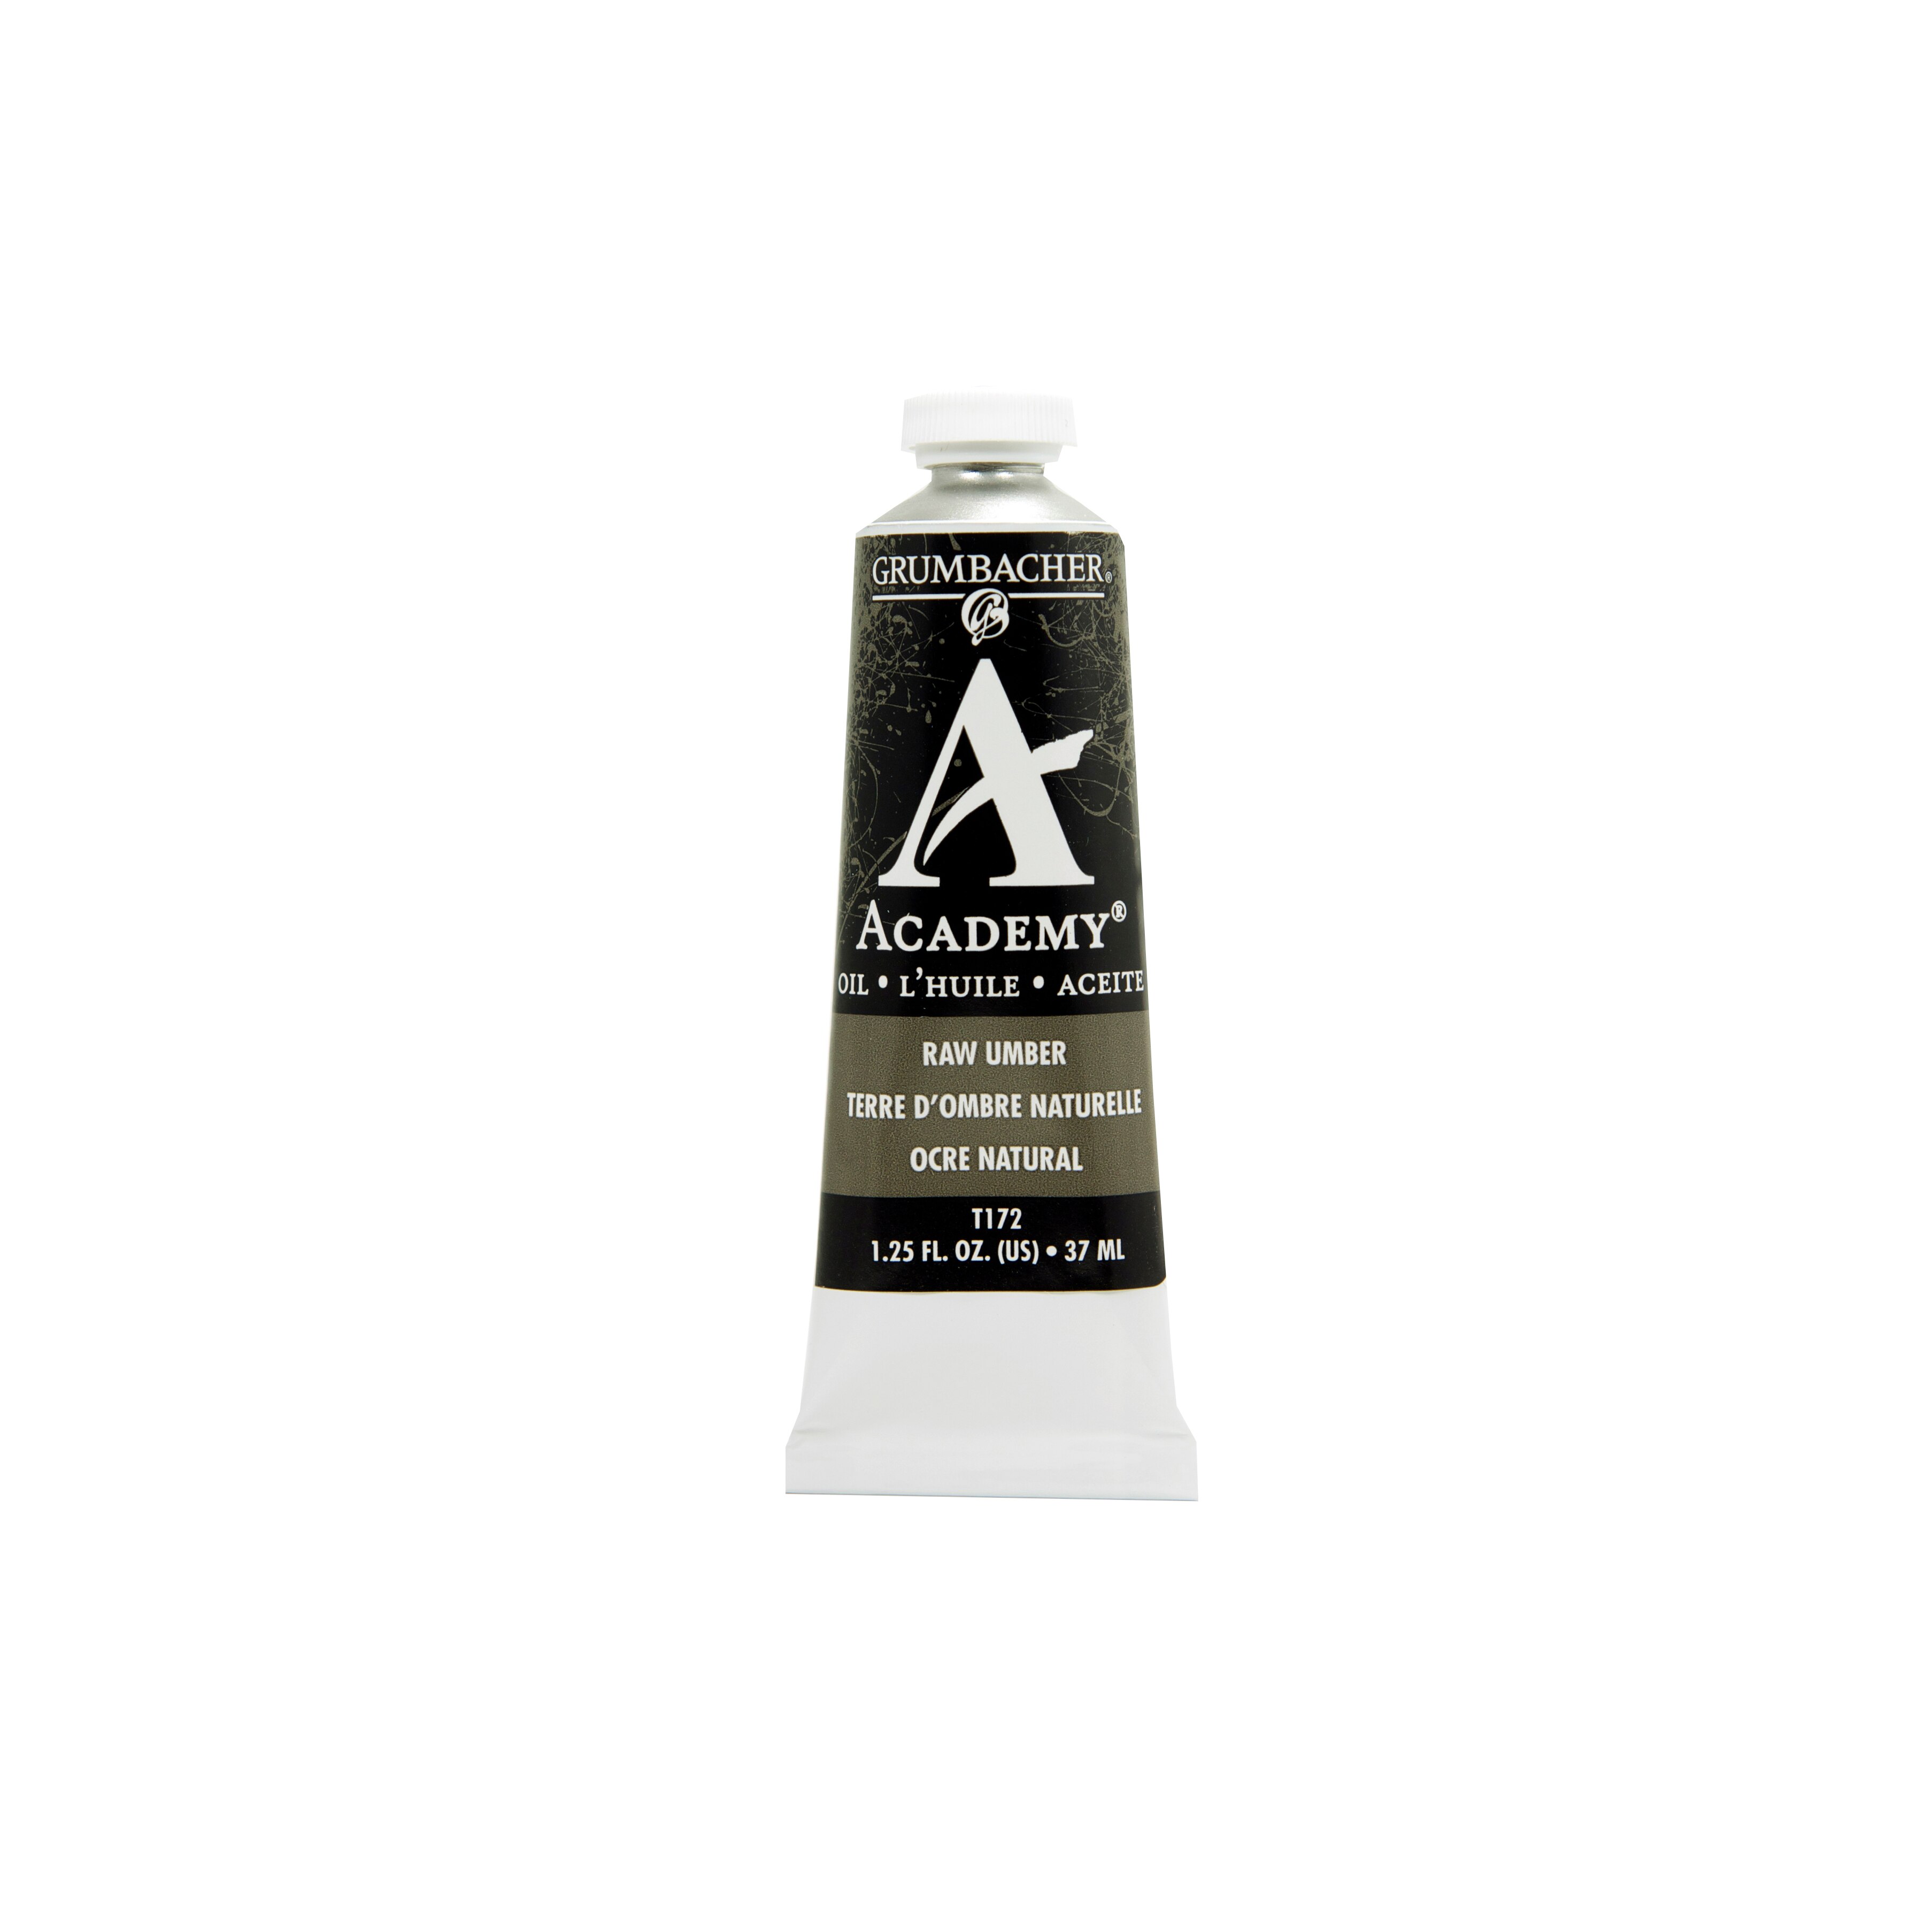 Grumbacher Academy Oil Color, 37ml Tube, Raw Umber